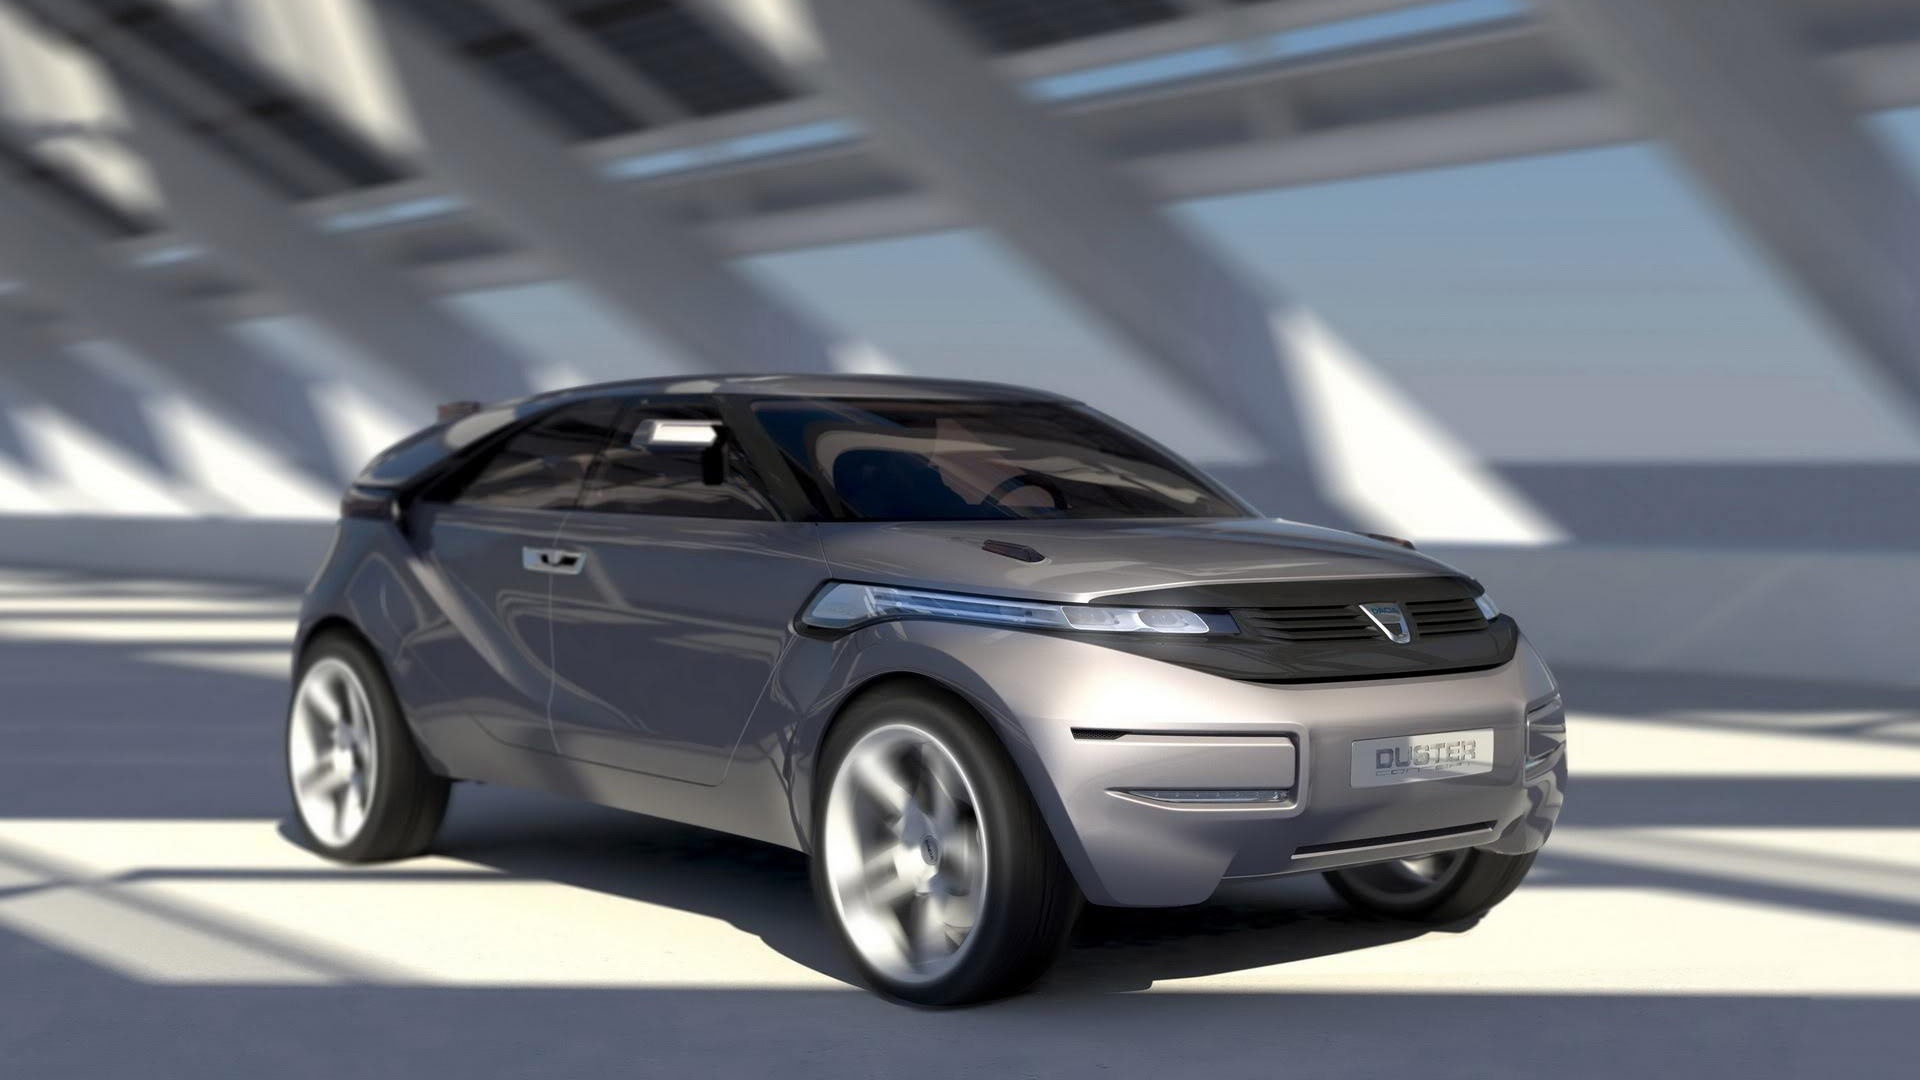 Dacia Duster Crossover Concept Running for 1920 x 1080 HDTV 1080p resolution